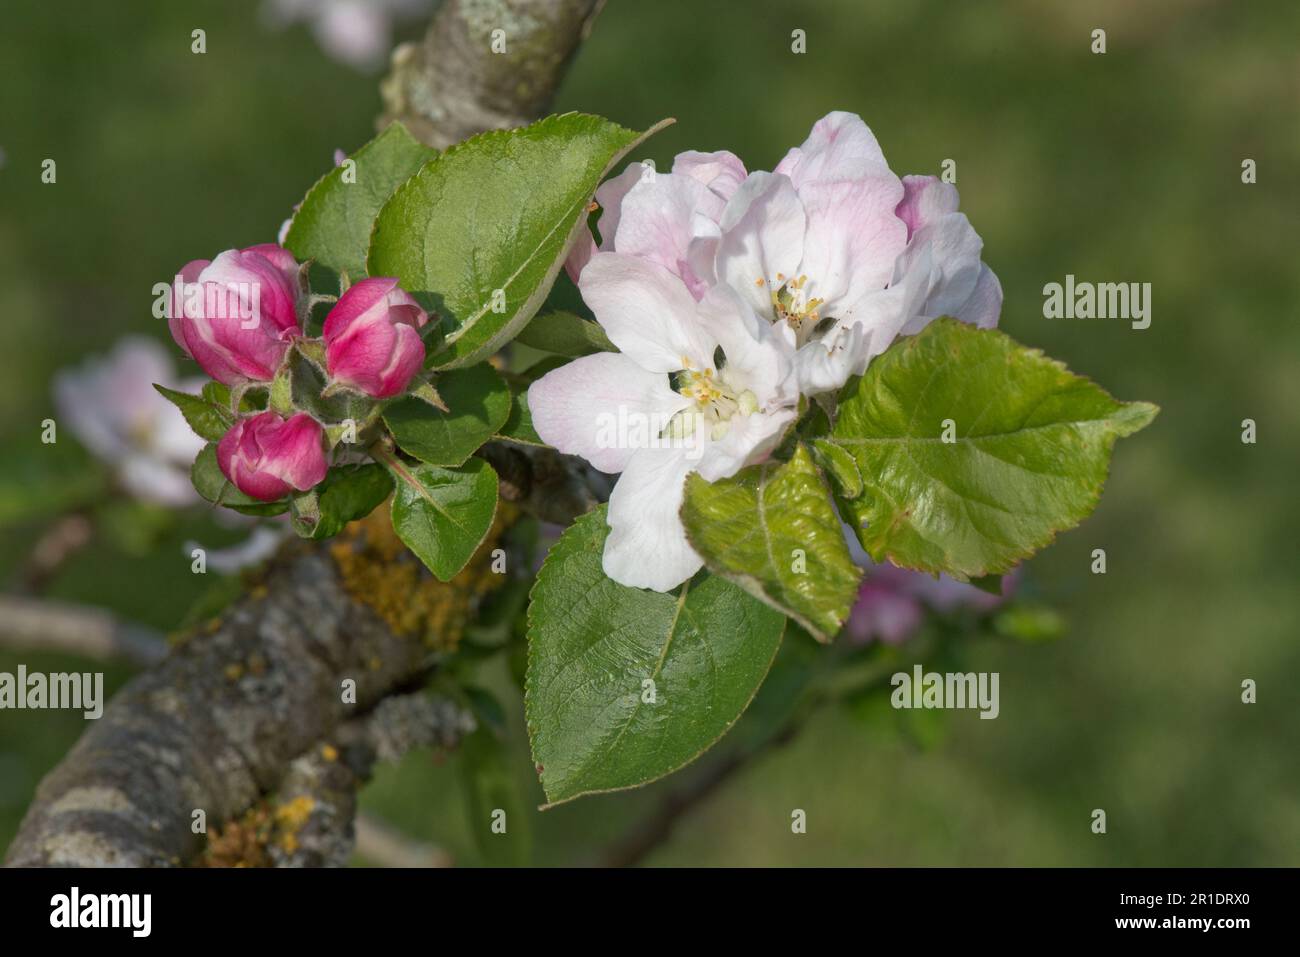 White and pink blossom and pink buds on an Egremont Russet eating apple tree (Malus domestica) with young leaves in spring, Berkshire, May Stock Photo